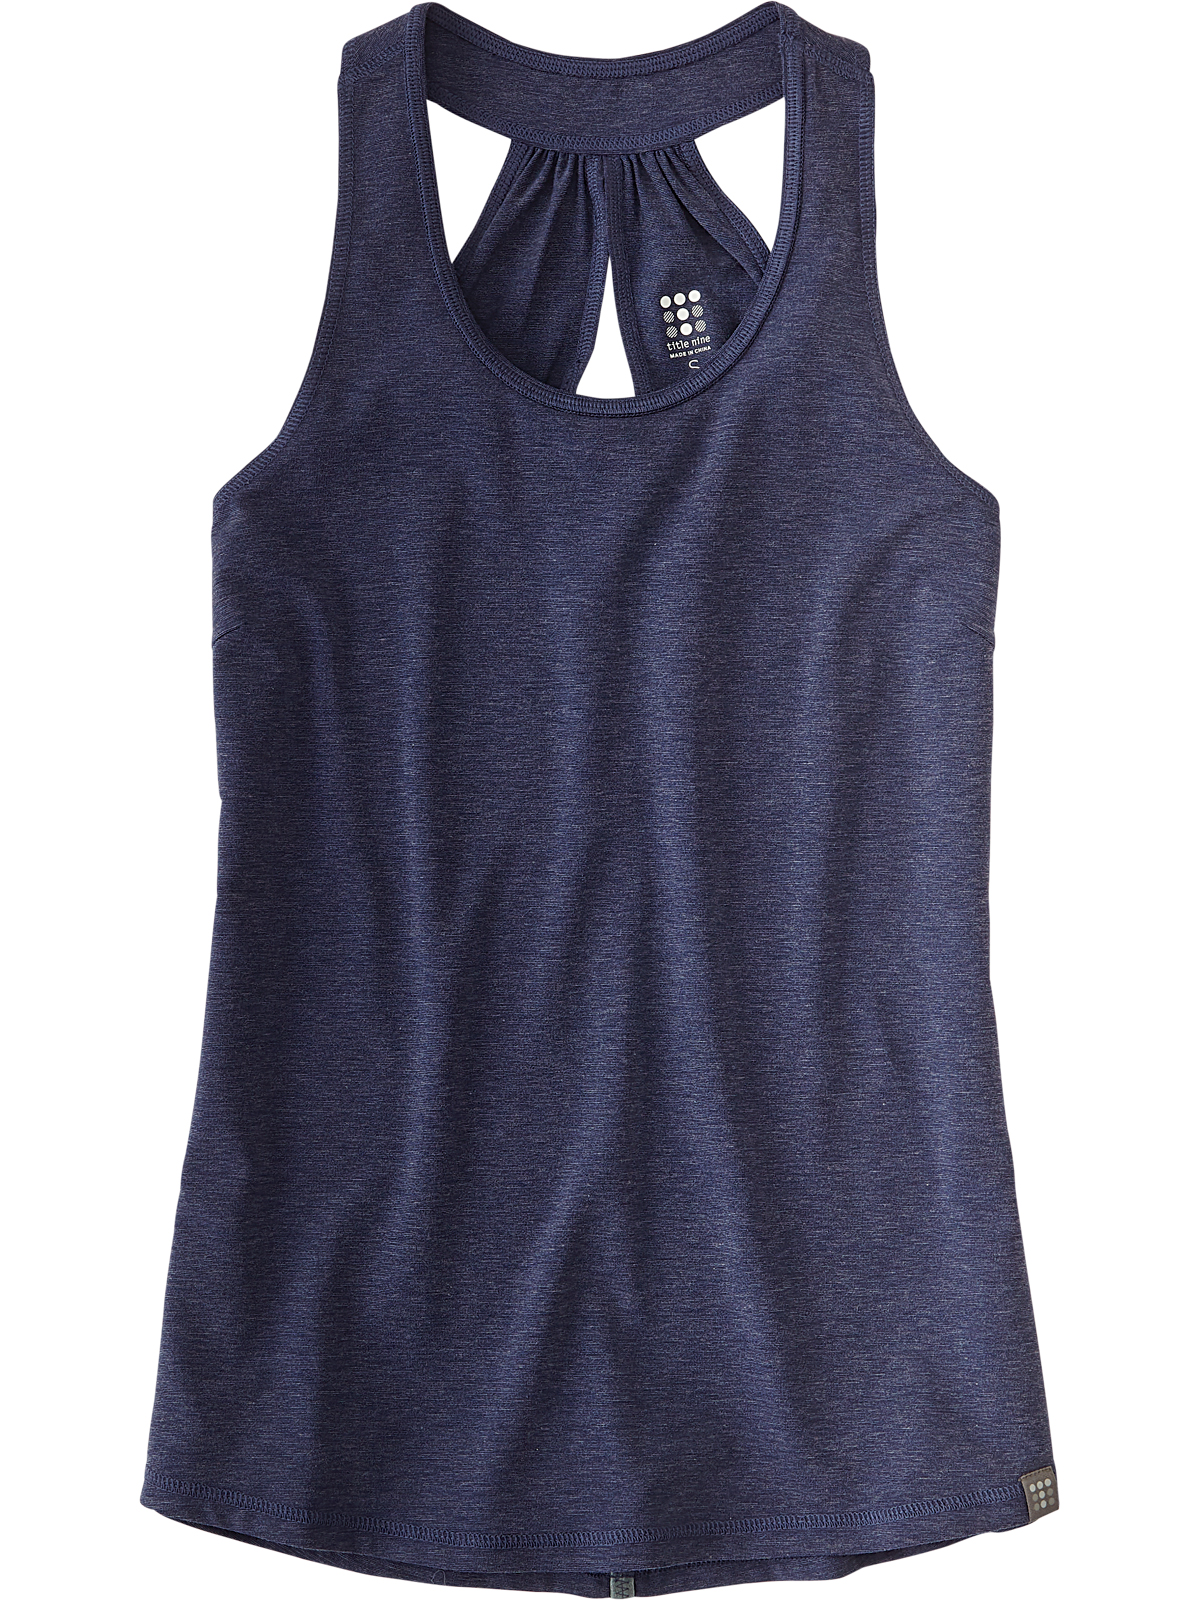 Sustainable Drirelease® Twisted Racer Tank Top - UP Clothing